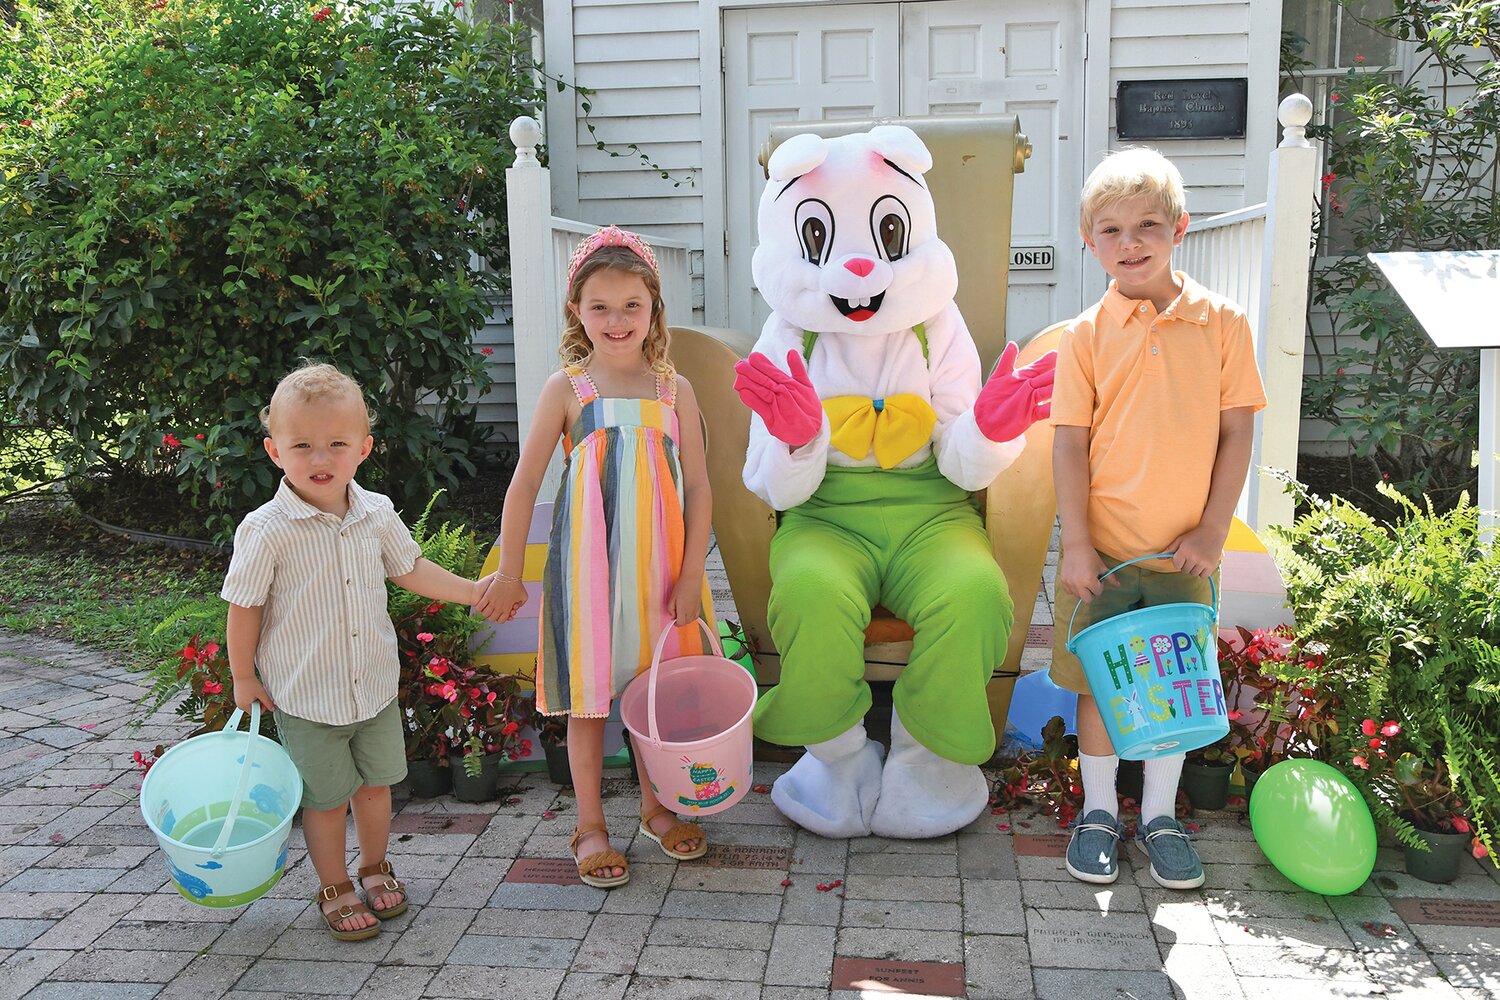 Photos with the Easter Bunny are all part of the fun. [Photo by Doreen Poreba]